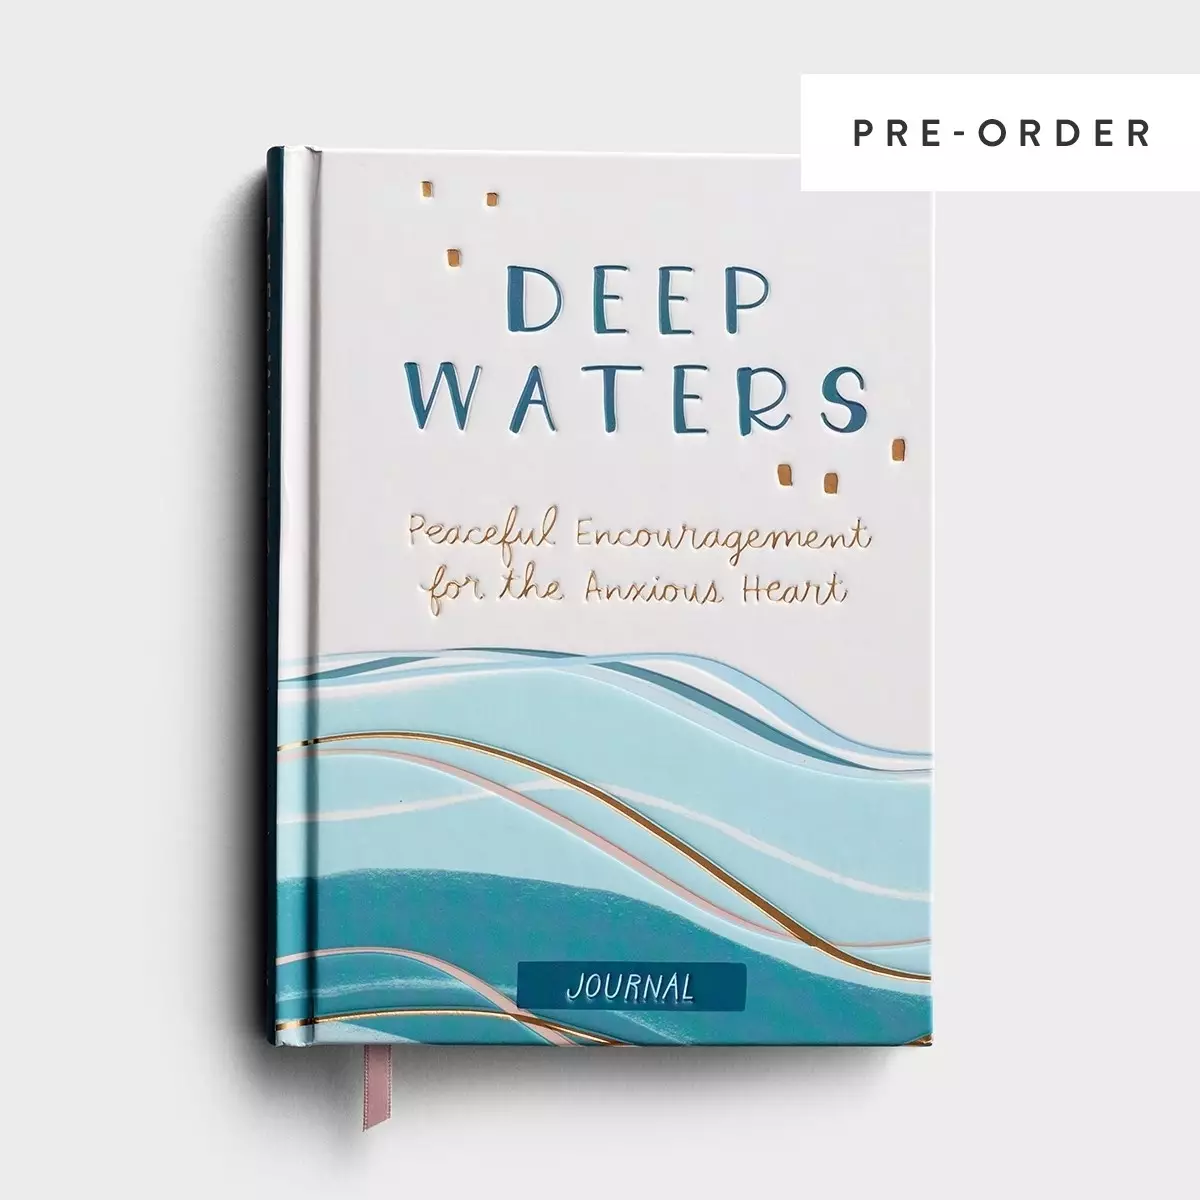 Journal-Deep Waters: Peaceful Enchouragement For The Anxious Heart